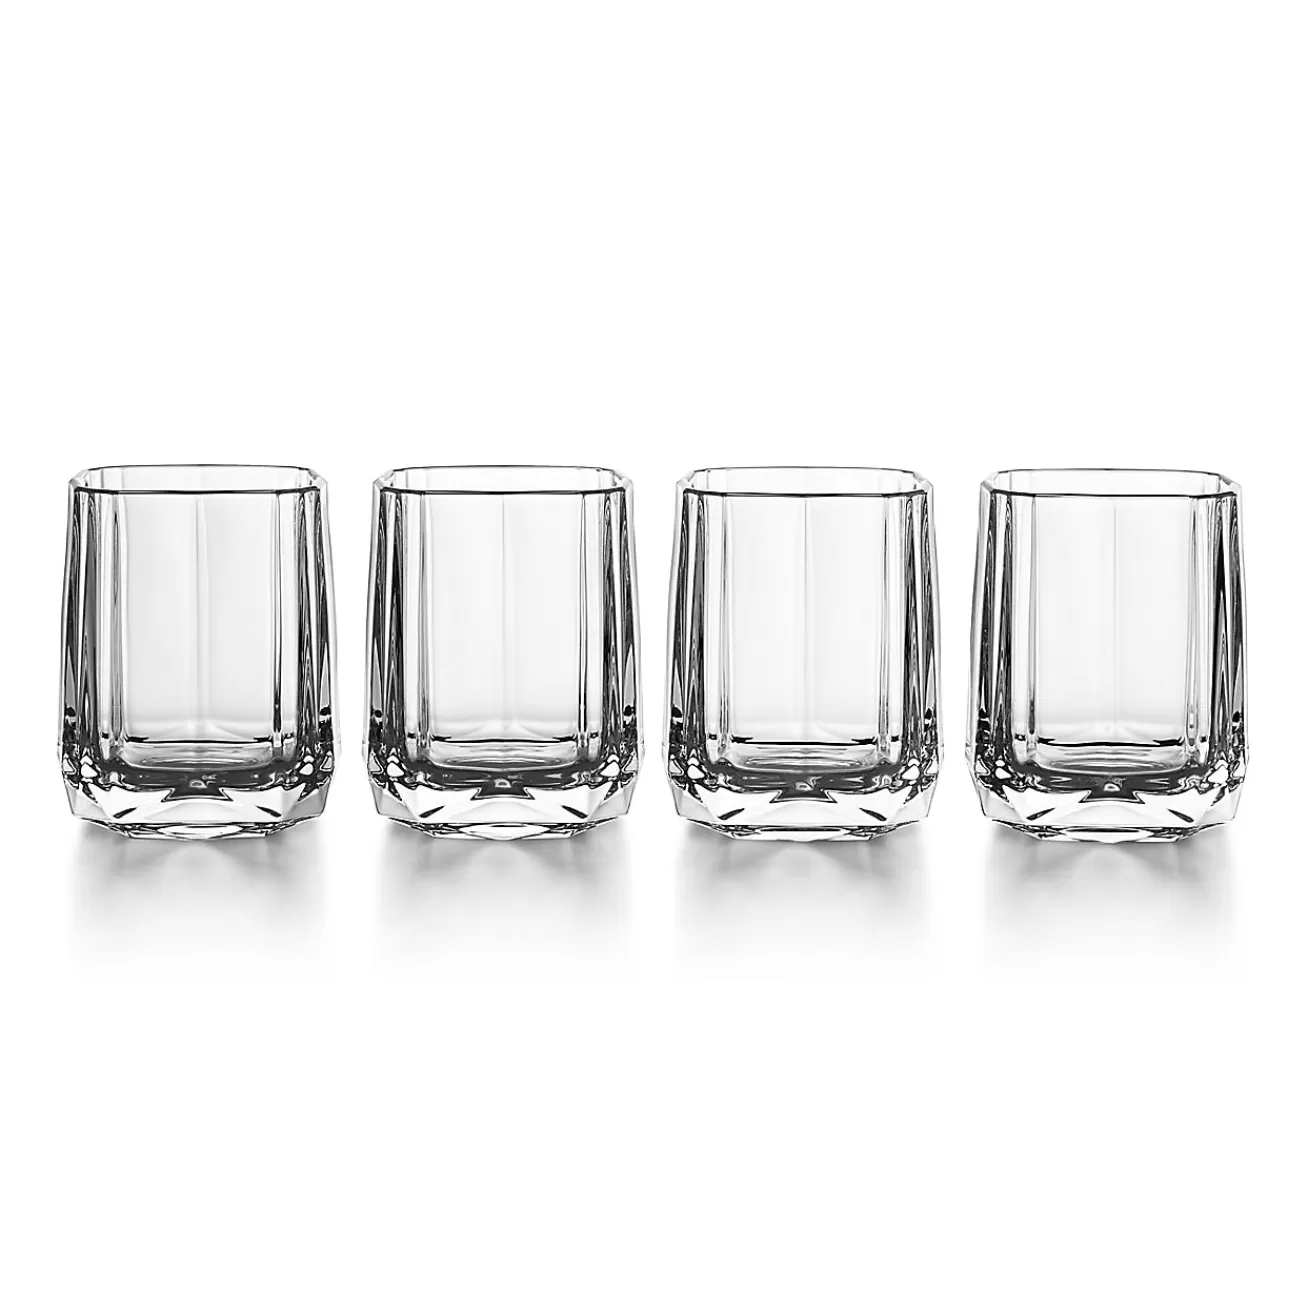 Tiffany & Co. Tiffany Facets Shot Glasses Set of Four, in Crystal Glass | ^ The Home | Housewarming Gifts